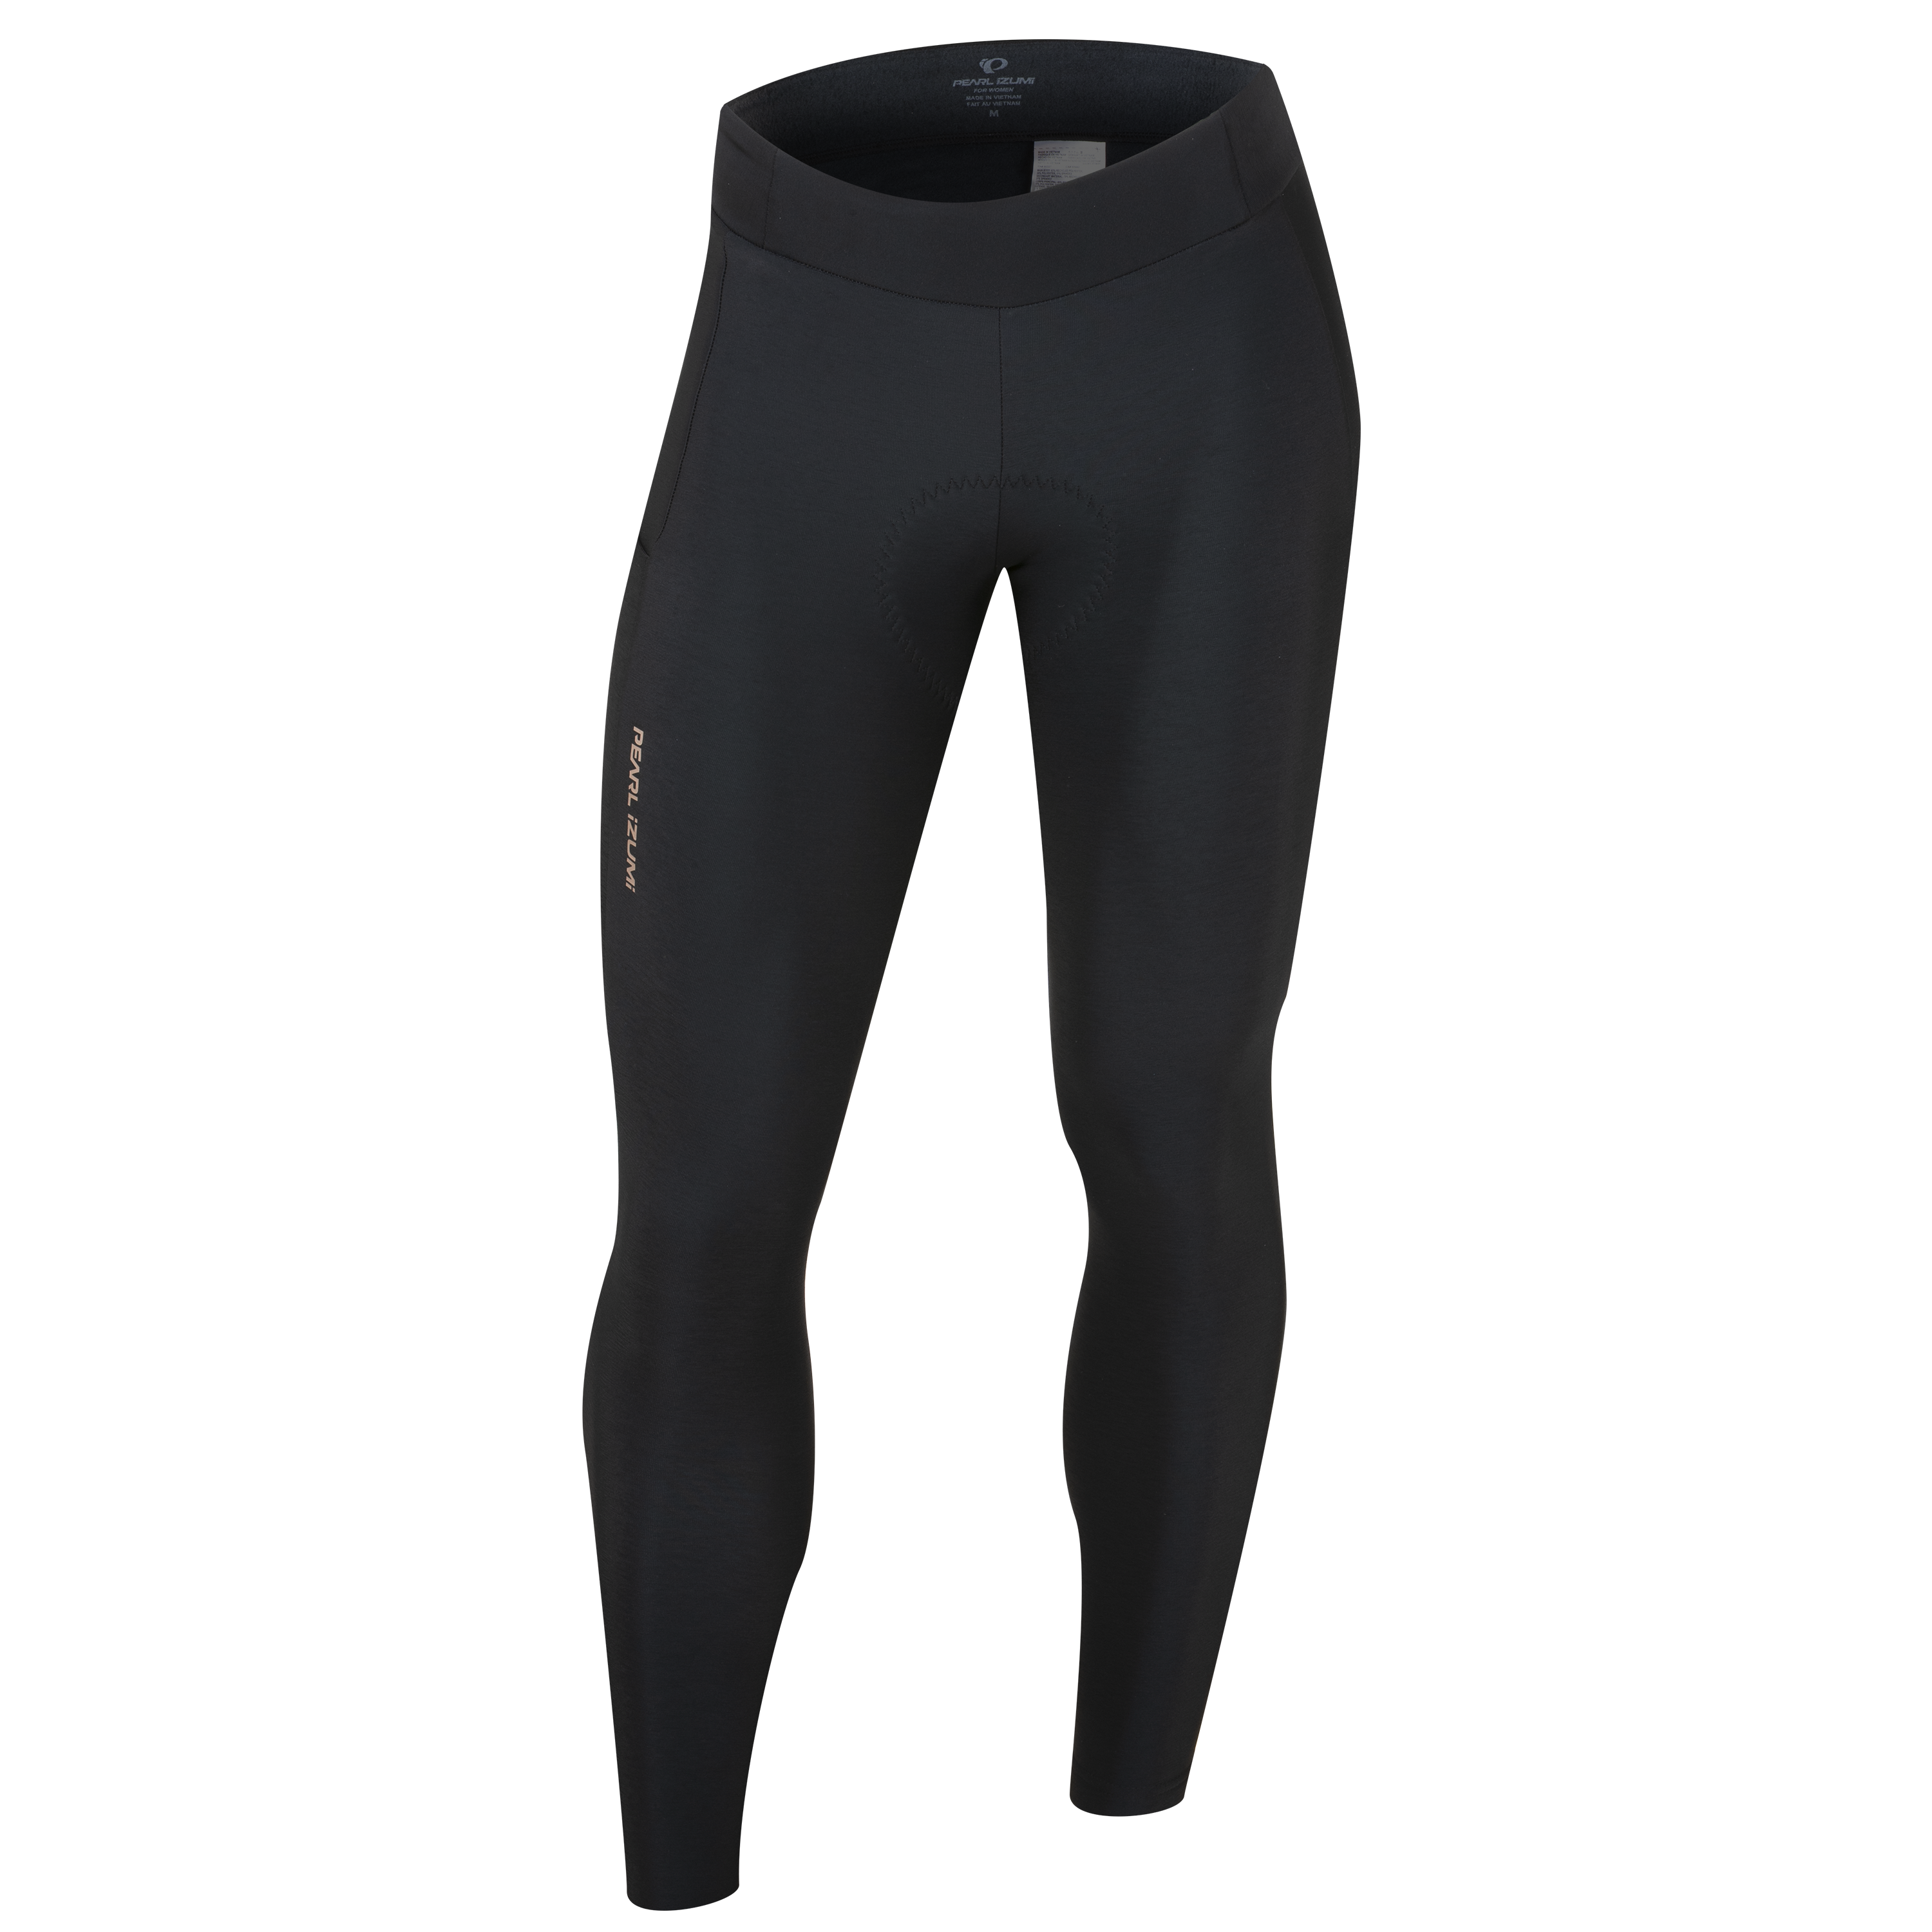  Pearl Izumi Women's Ultra Tight, Black, X-Small : Cycling Pants  : Clothing, Shoes & Jewelry